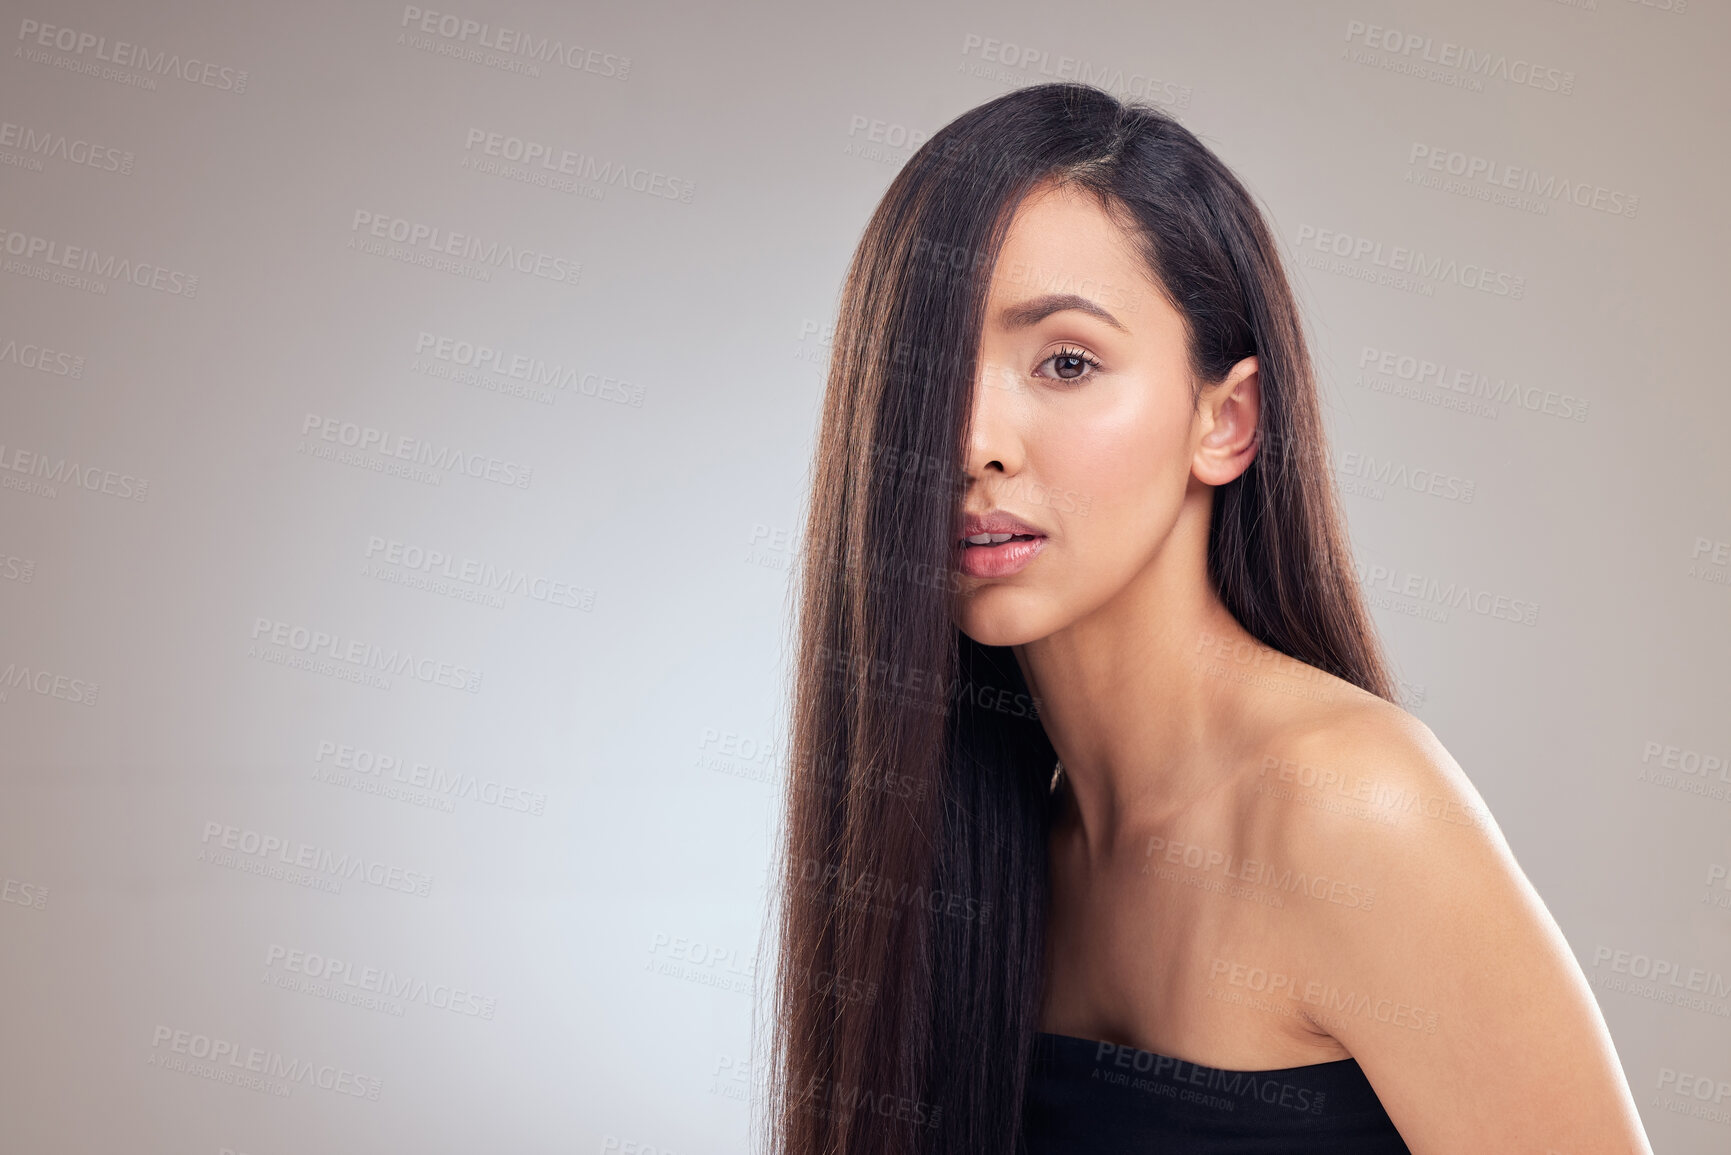 Buy stock photo Shot of an attractive young woman posing alone in the studio with her hair covering half of her face